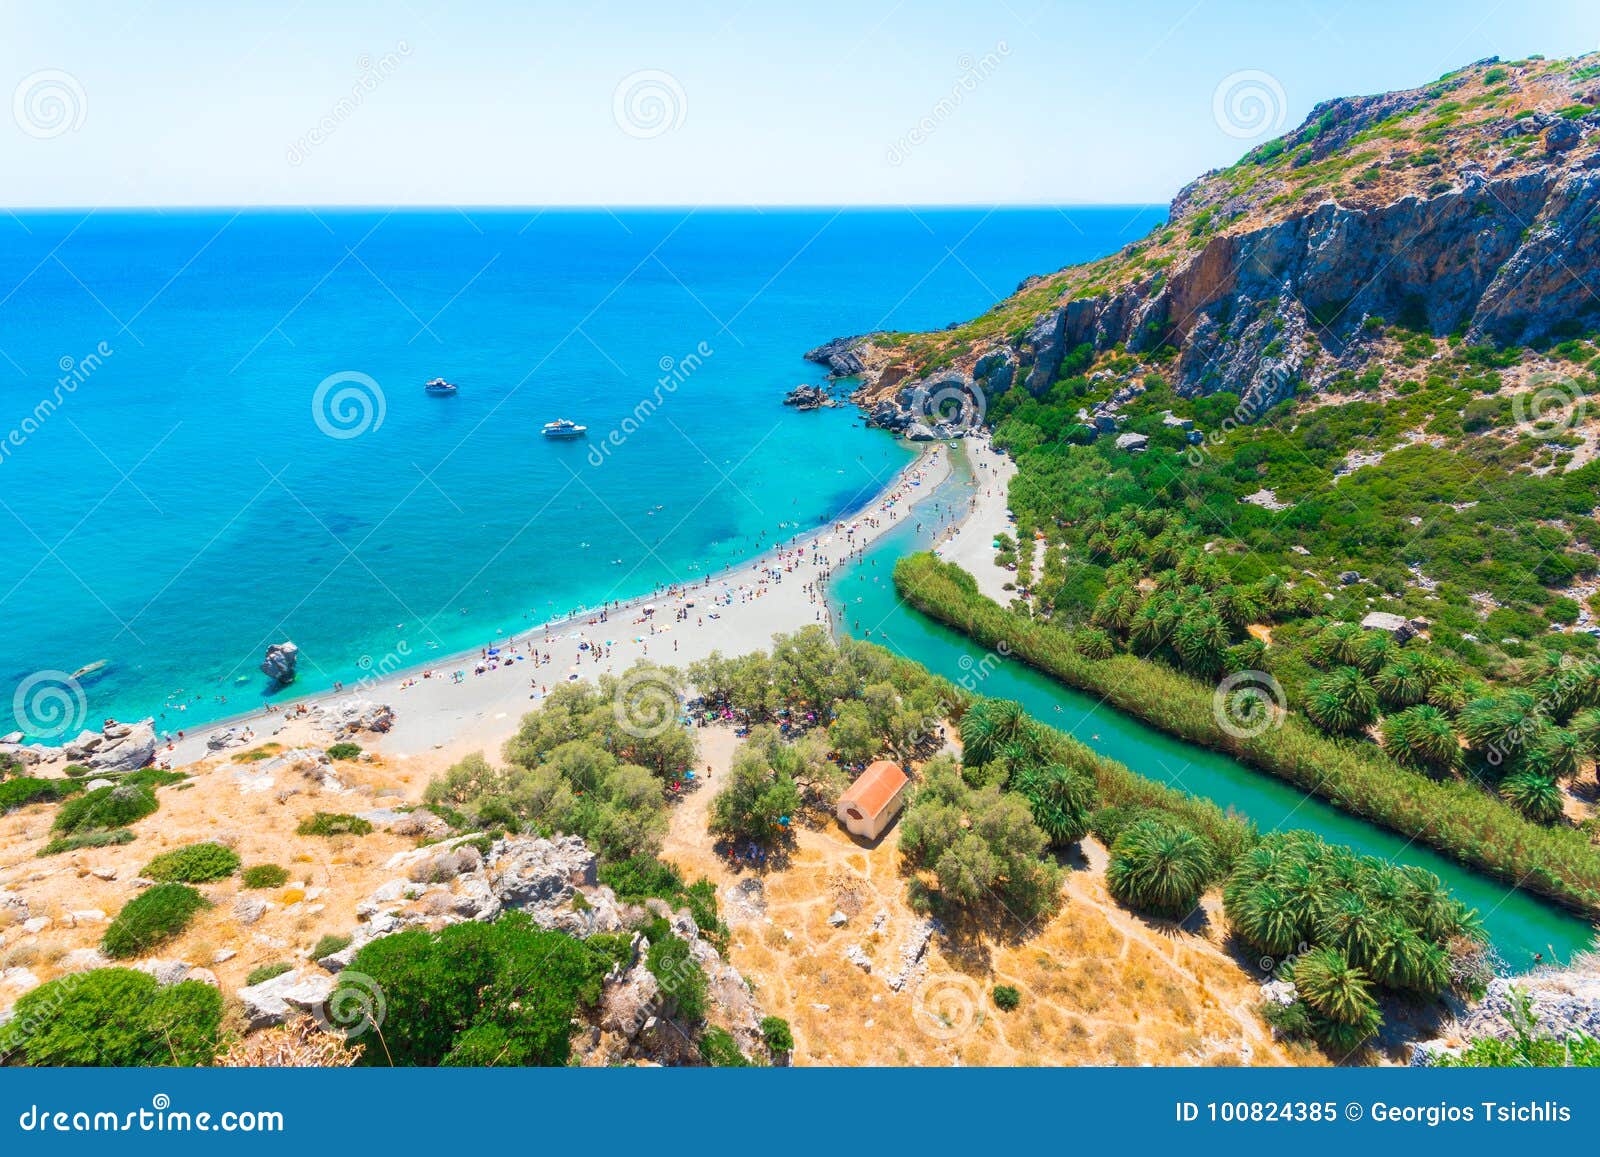 panorama of preveli beach at libyan sea, river and palm forest, southern crete.